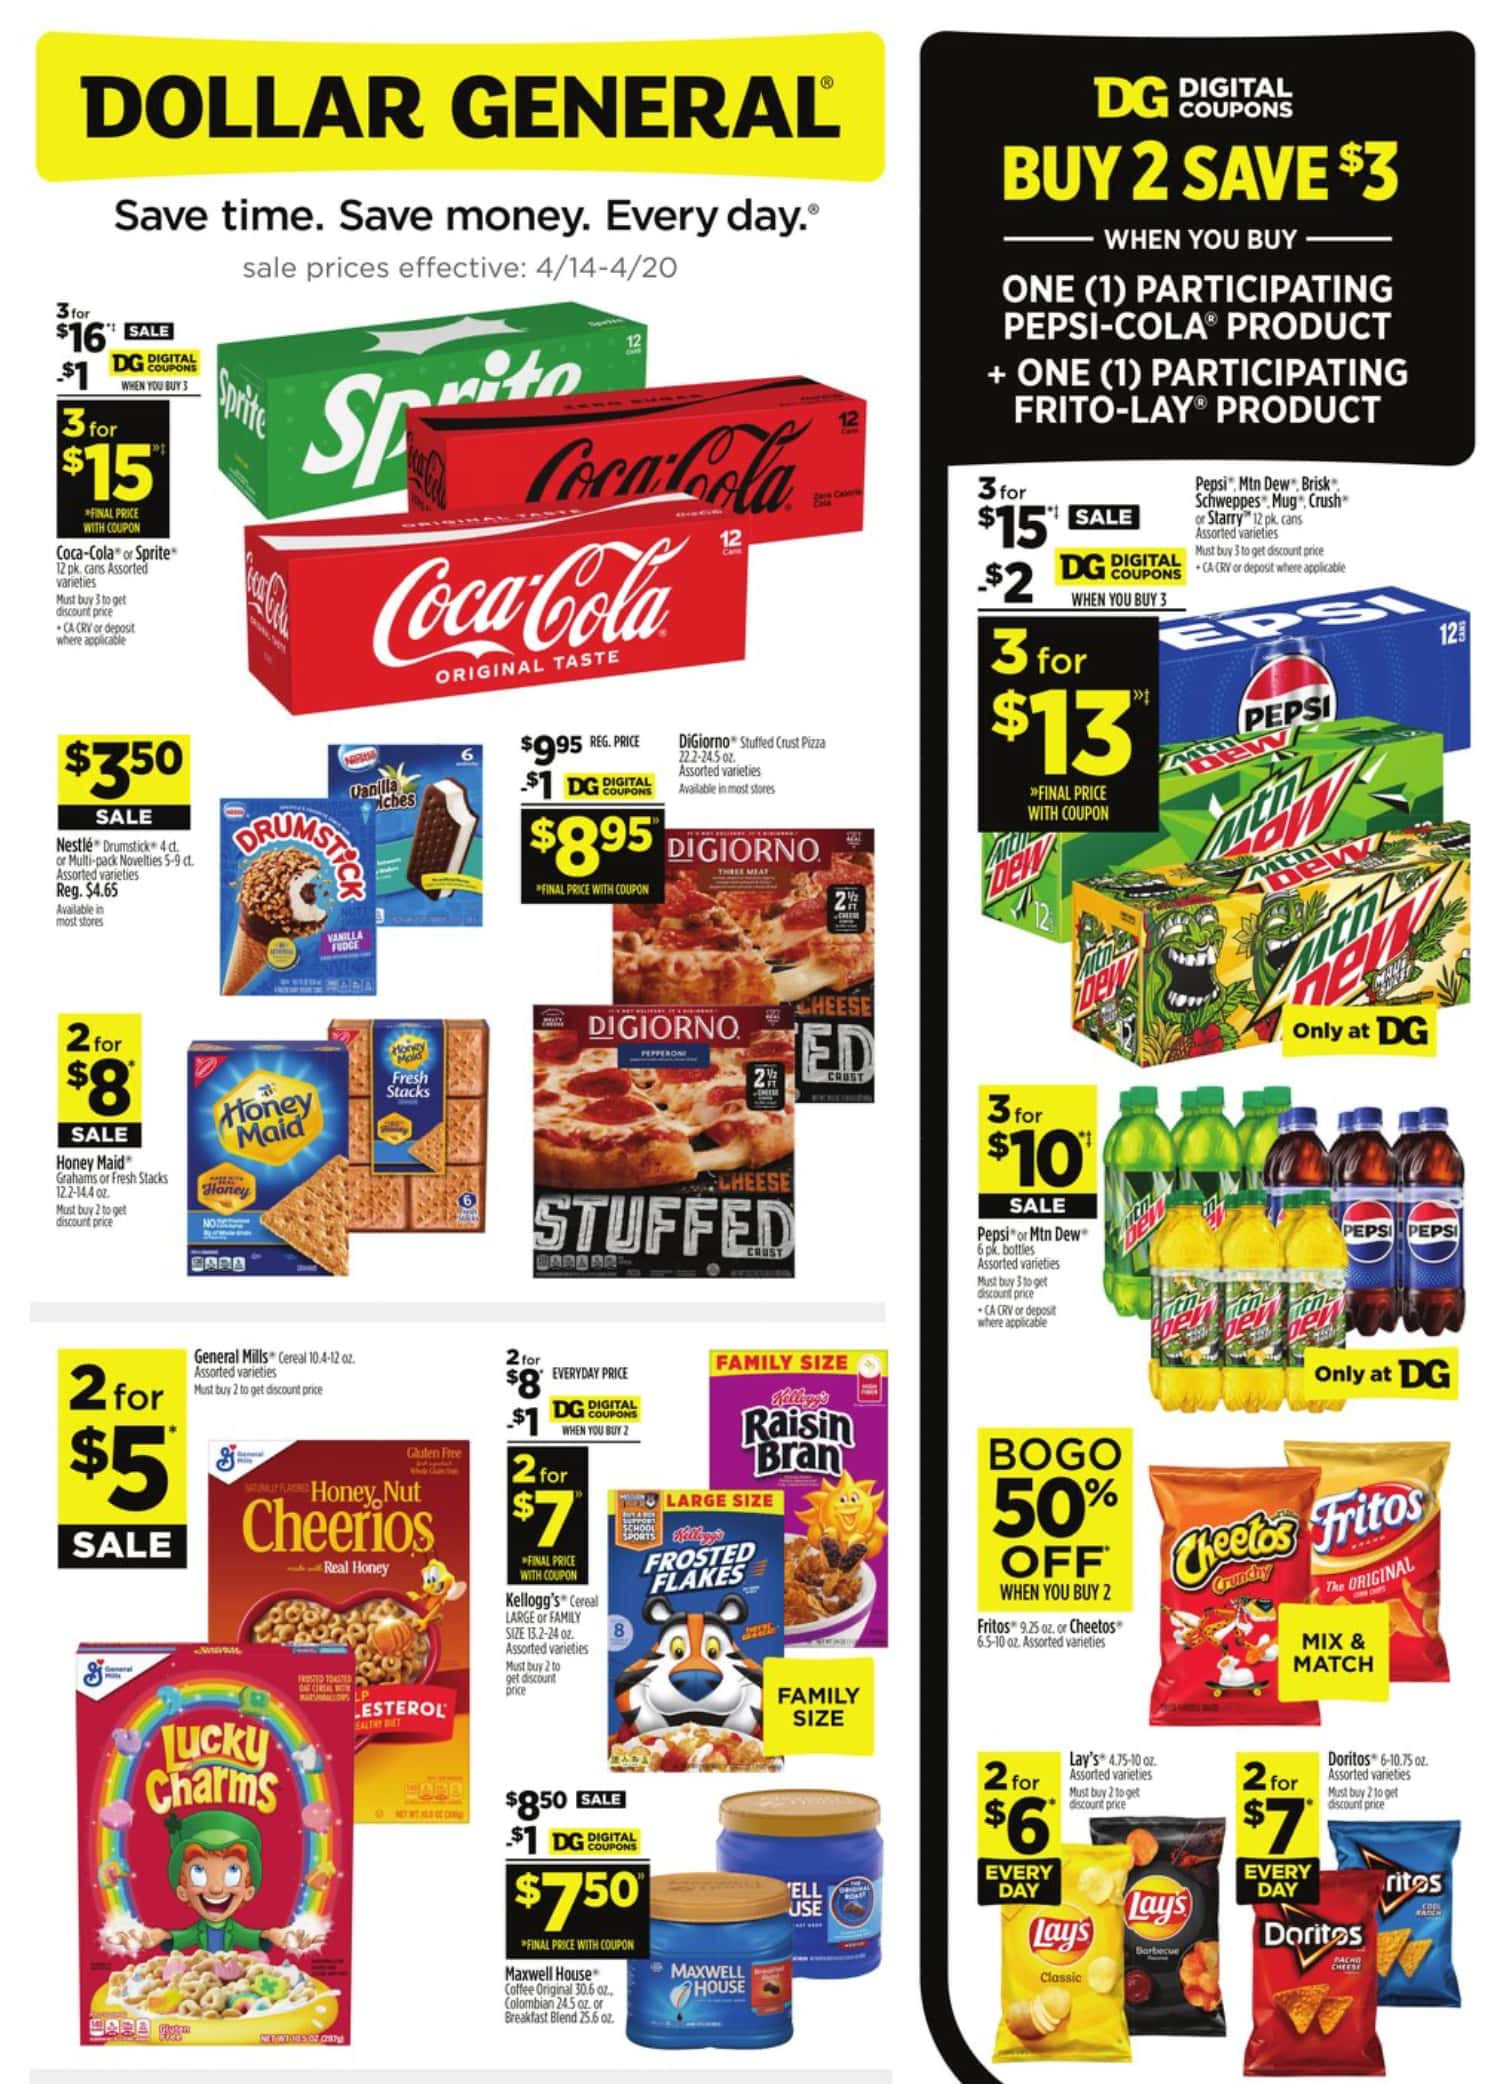 DollarGeneral_weekly_ad_041424_01